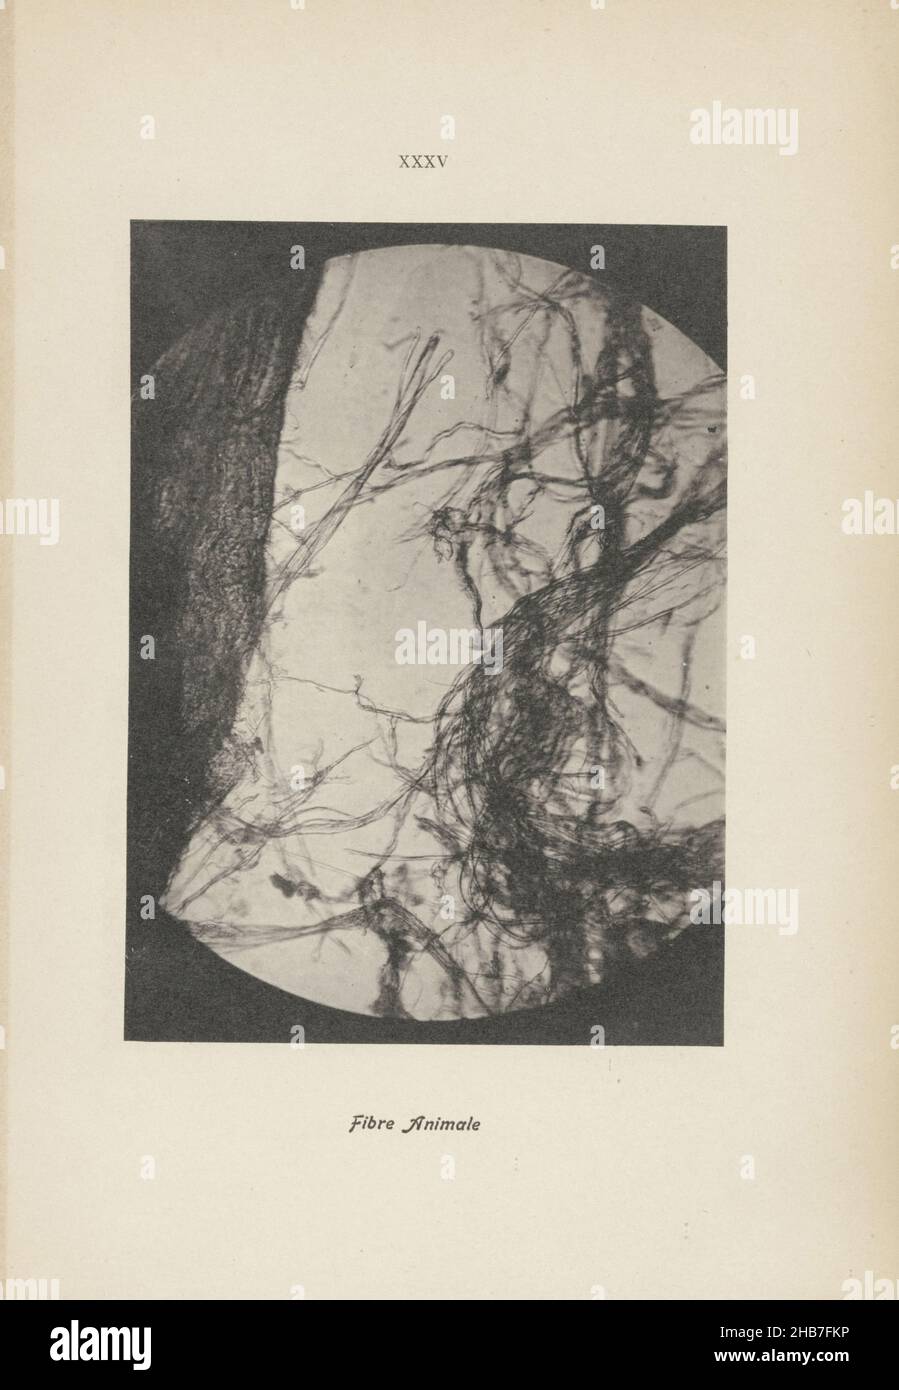 XXXV Fibre Animale (title on object), Plate from Précis Historique., anonymous, France, 1900, paper, ink, collotype, height 165 mm × width 125 mmheight 280 mm × width 189 mm Stock Photo